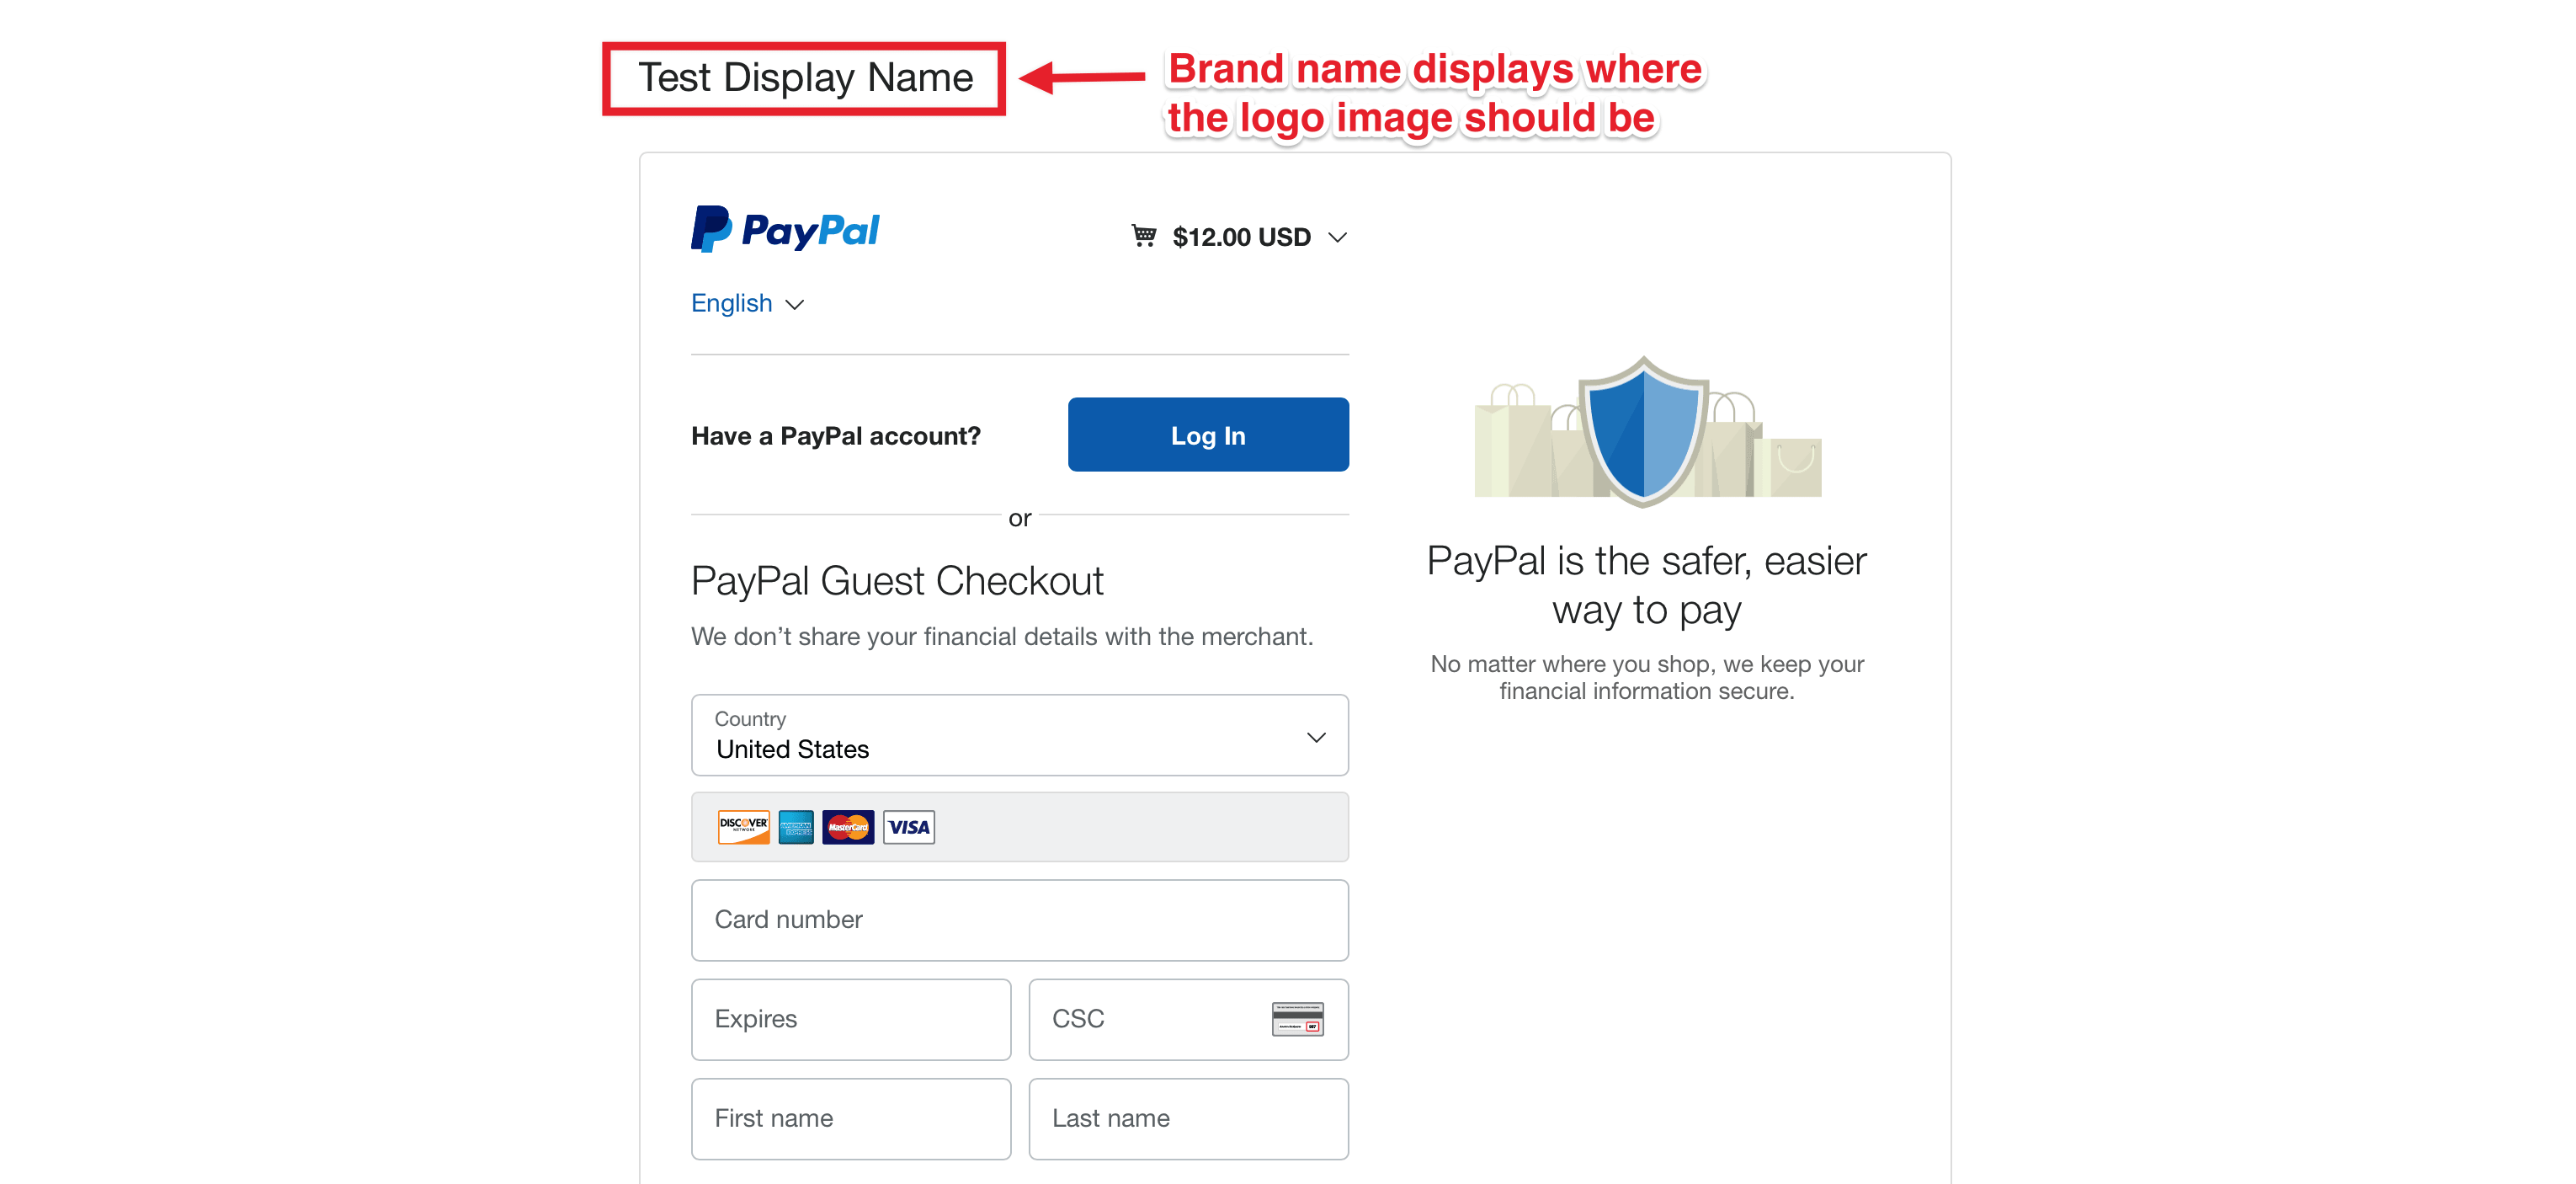 PayPal Check Out Logo - Logo Image not displaying in PayPal Checkout page · Issue #371 ...